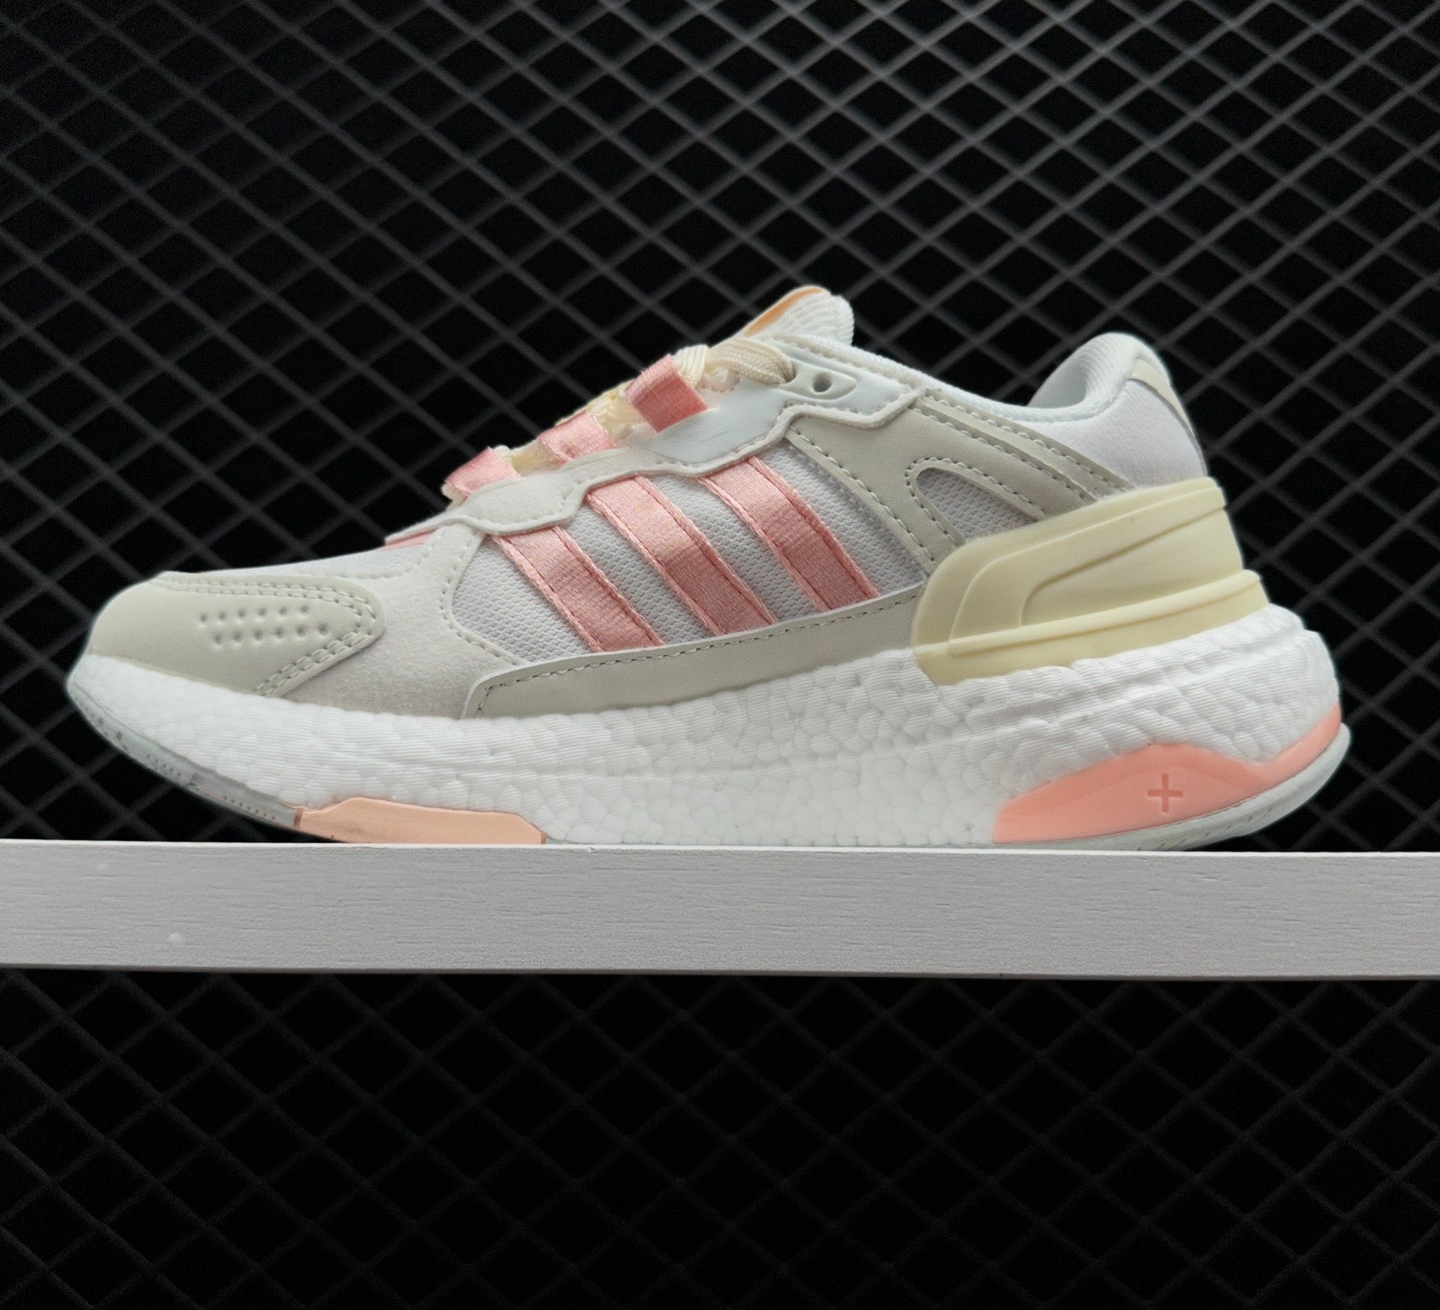 Adidas EQUIPMENT Cloud White Grey Pink GX6631 - Buy Online Now